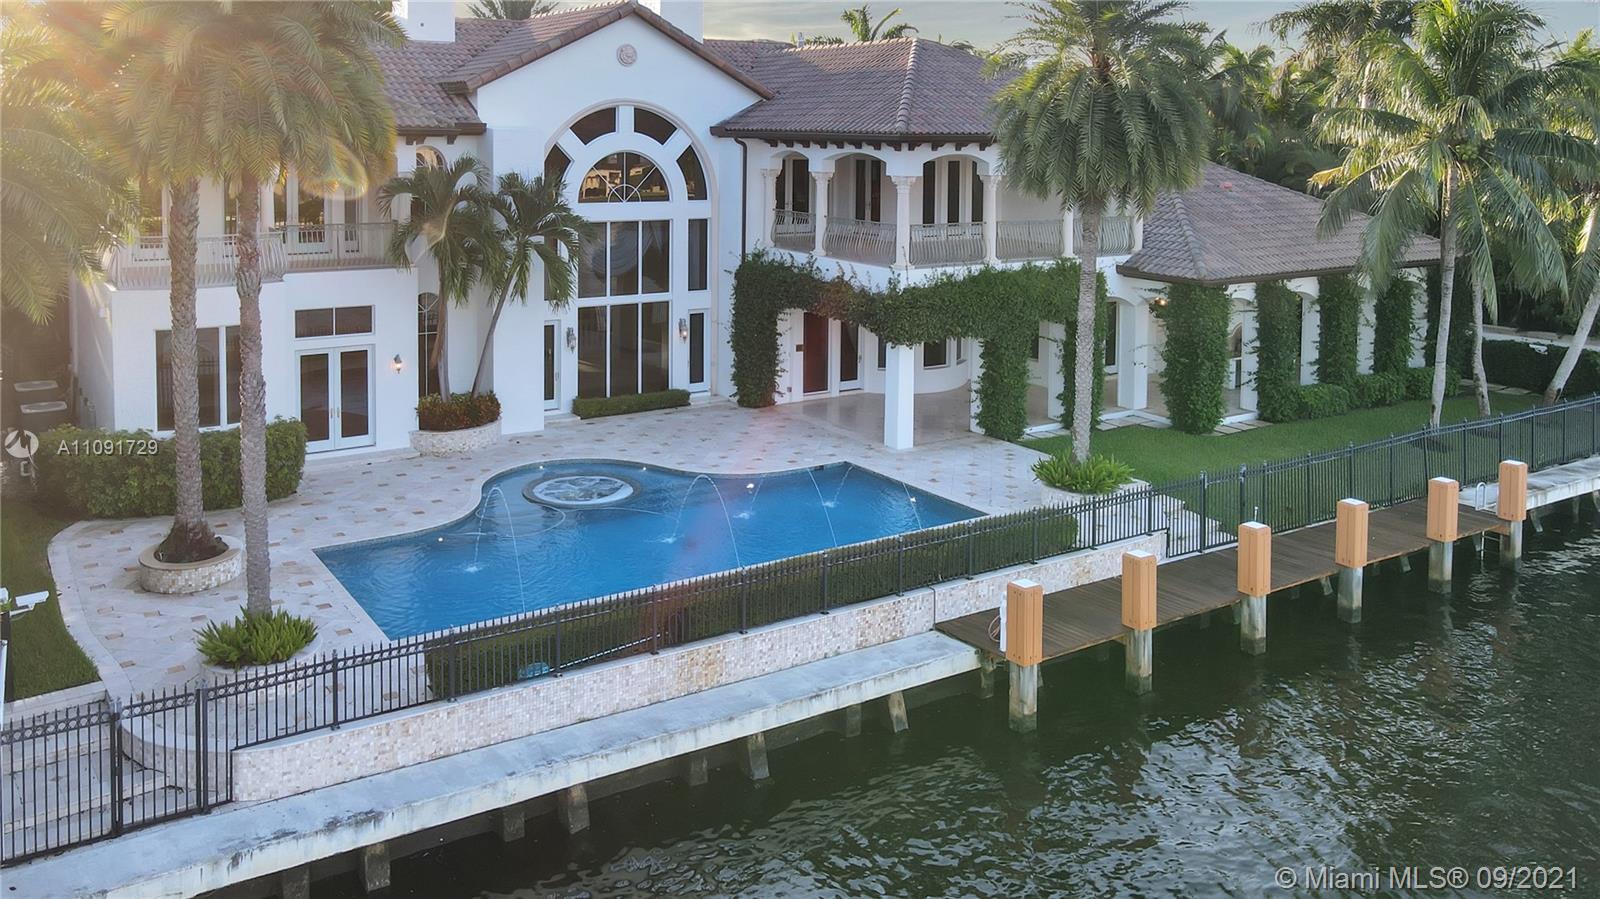 Splendid Spanish Colonial inspired estate  with 140 +/- feet of waterfrontage on the intracoastal of prestigious  Boca Raton's Estate Section. A walk from The Boca Raton Resort and Beach Club. Shown by appointment​​‌​​​​‌​​‌‌​‌‌‌​​‌‌​‌‌‌​​‌‌​‌‌‌ only